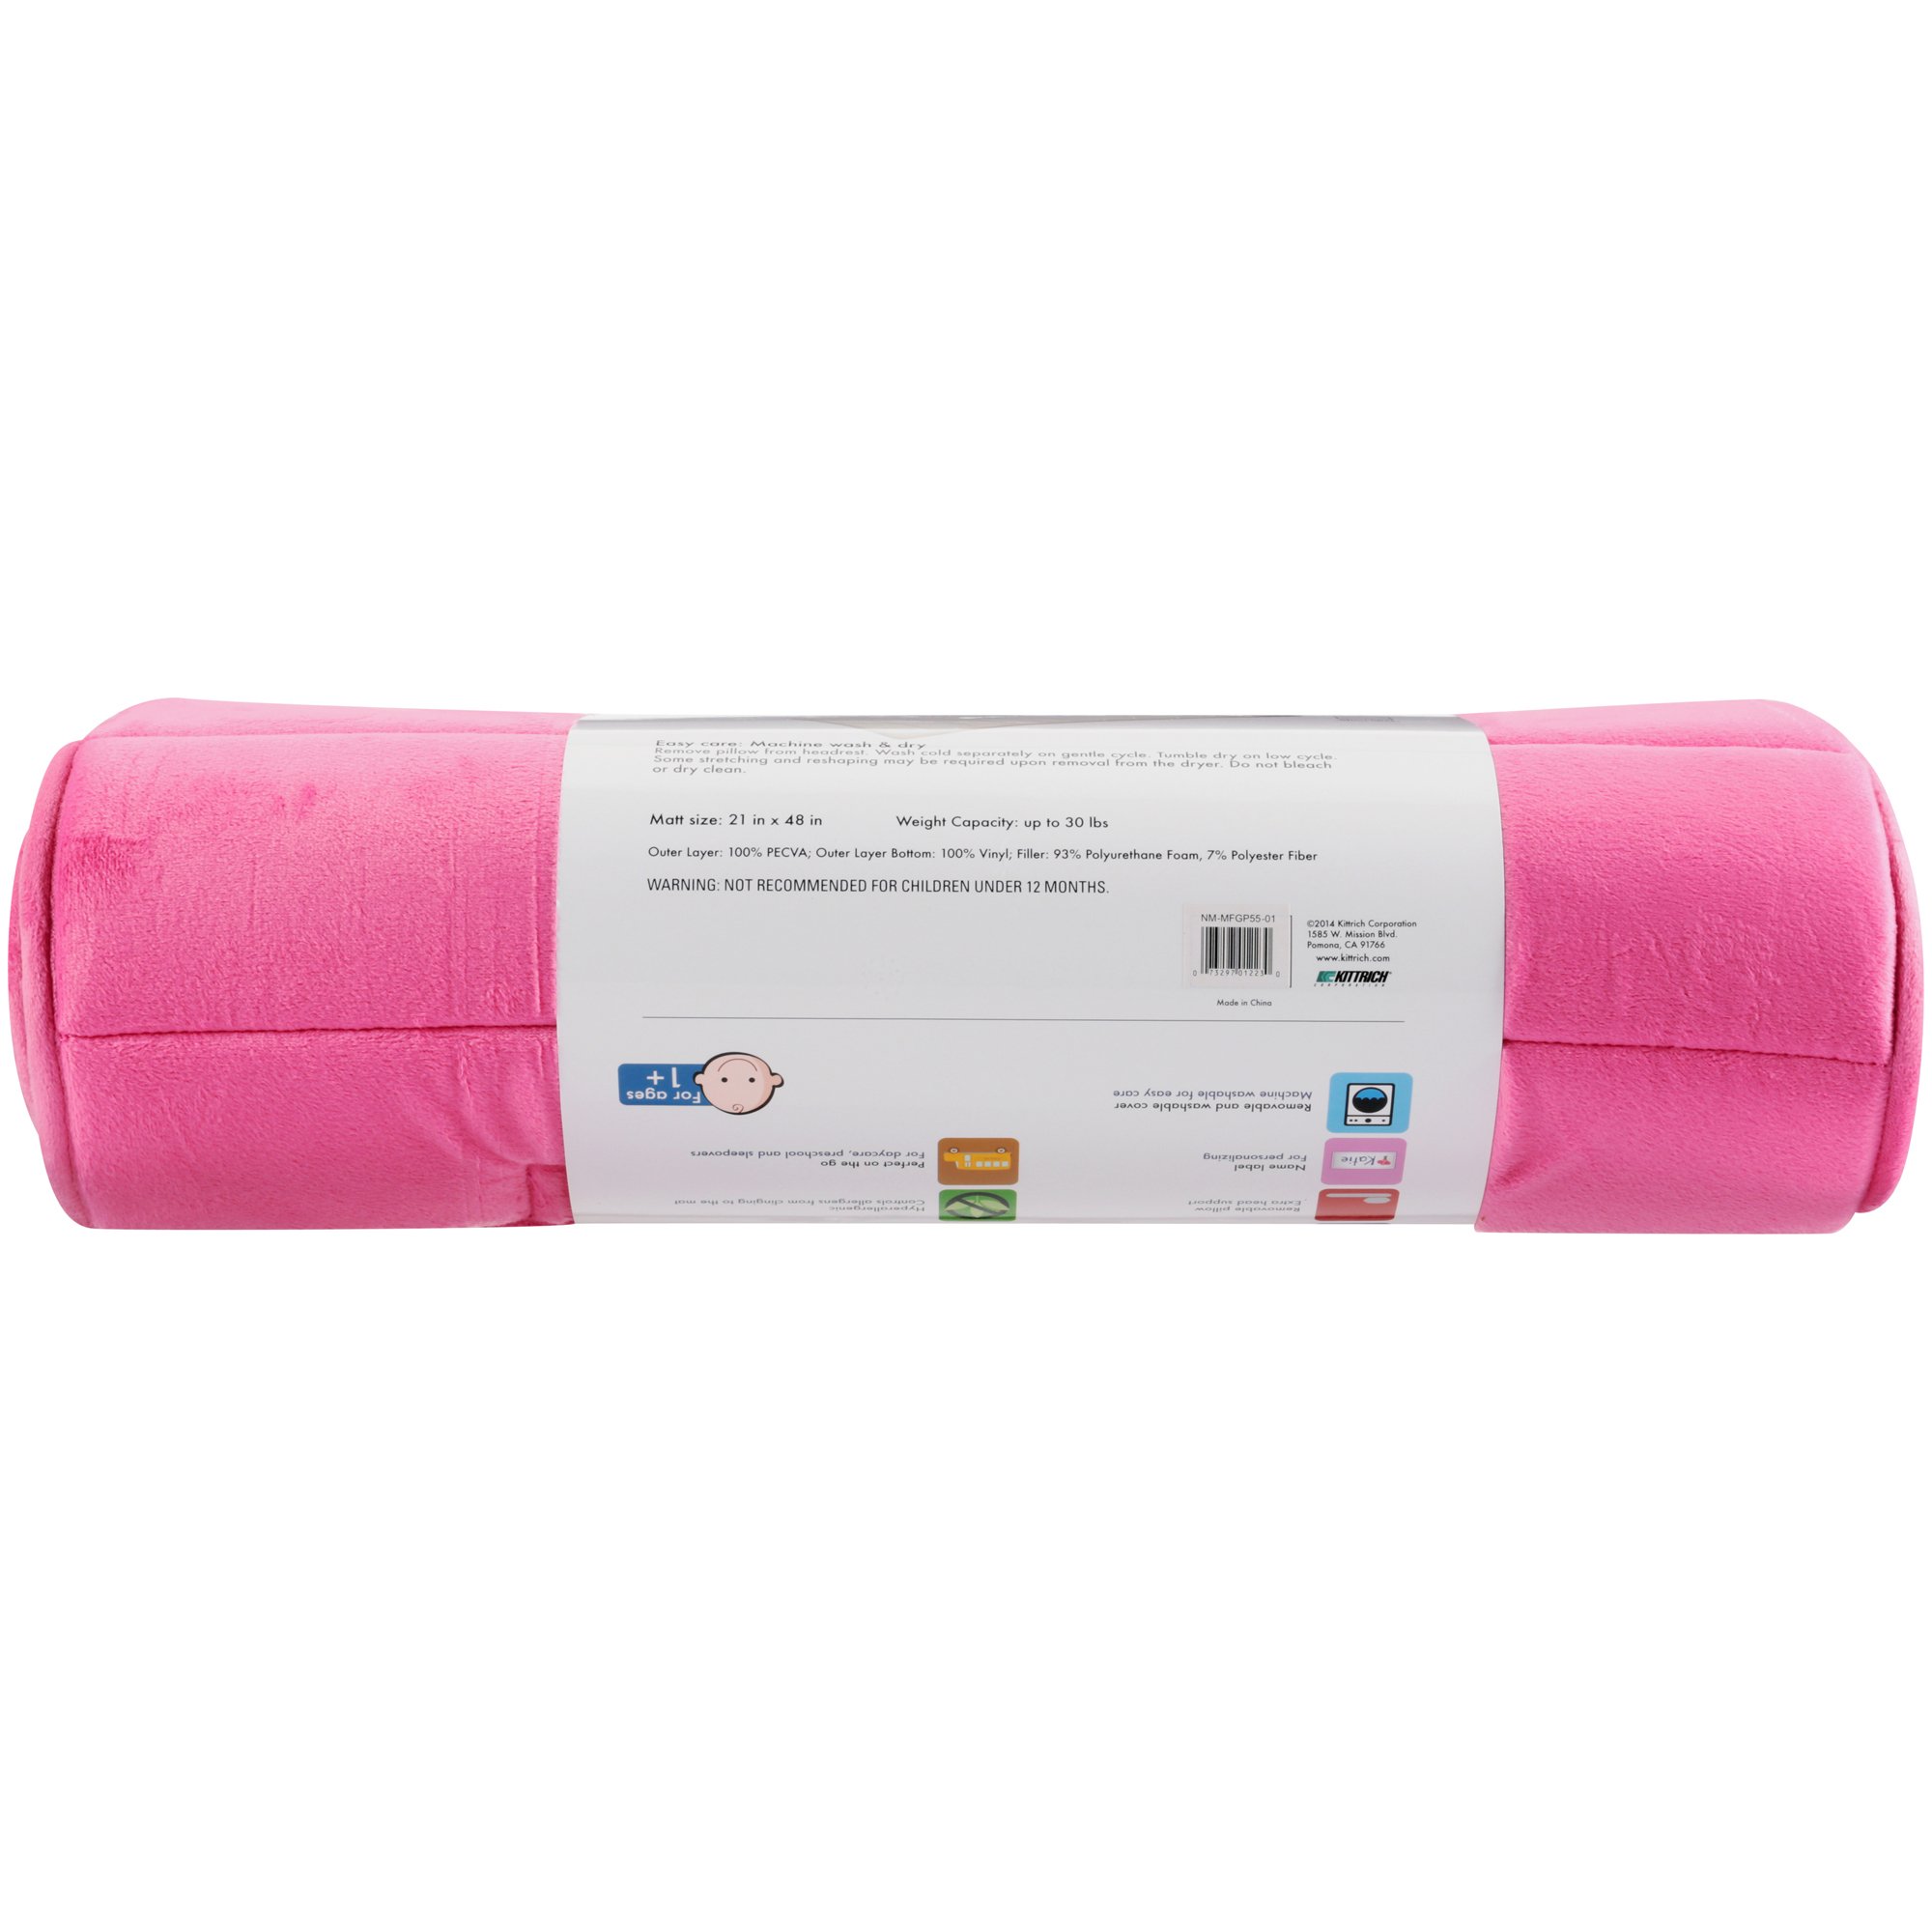 My First Pillow Female Pink Solid Memory Foam Nap Mats, Cushioned Removable Washable Cooling - image 5 of 5